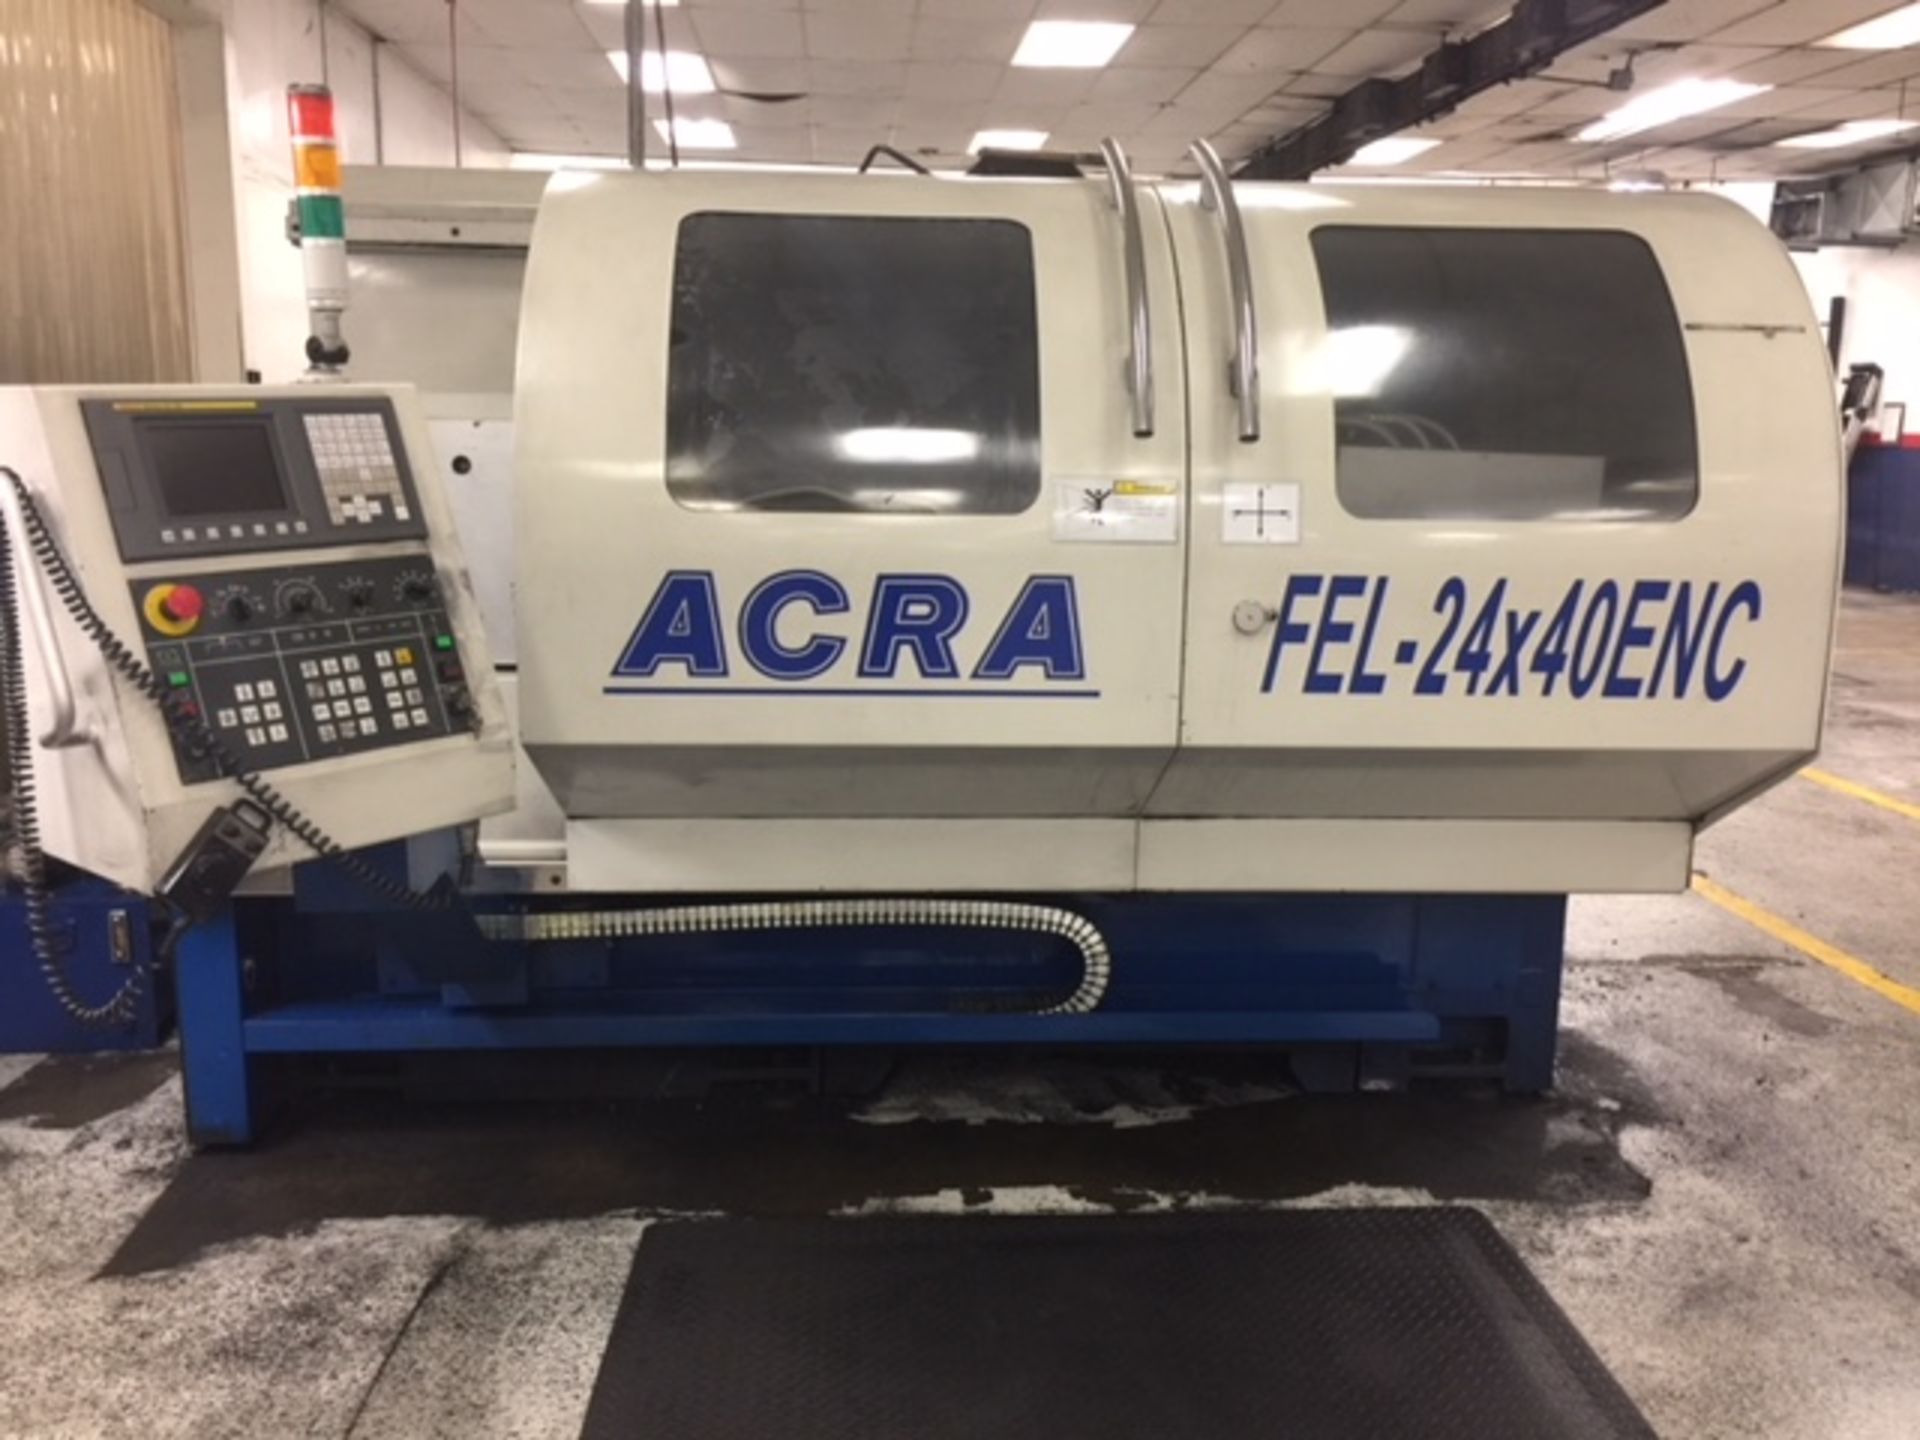 24" x 40" Acra Model FEL-24x40-ENC CNC Lathe with C Axis Milling - Image 2 of 10